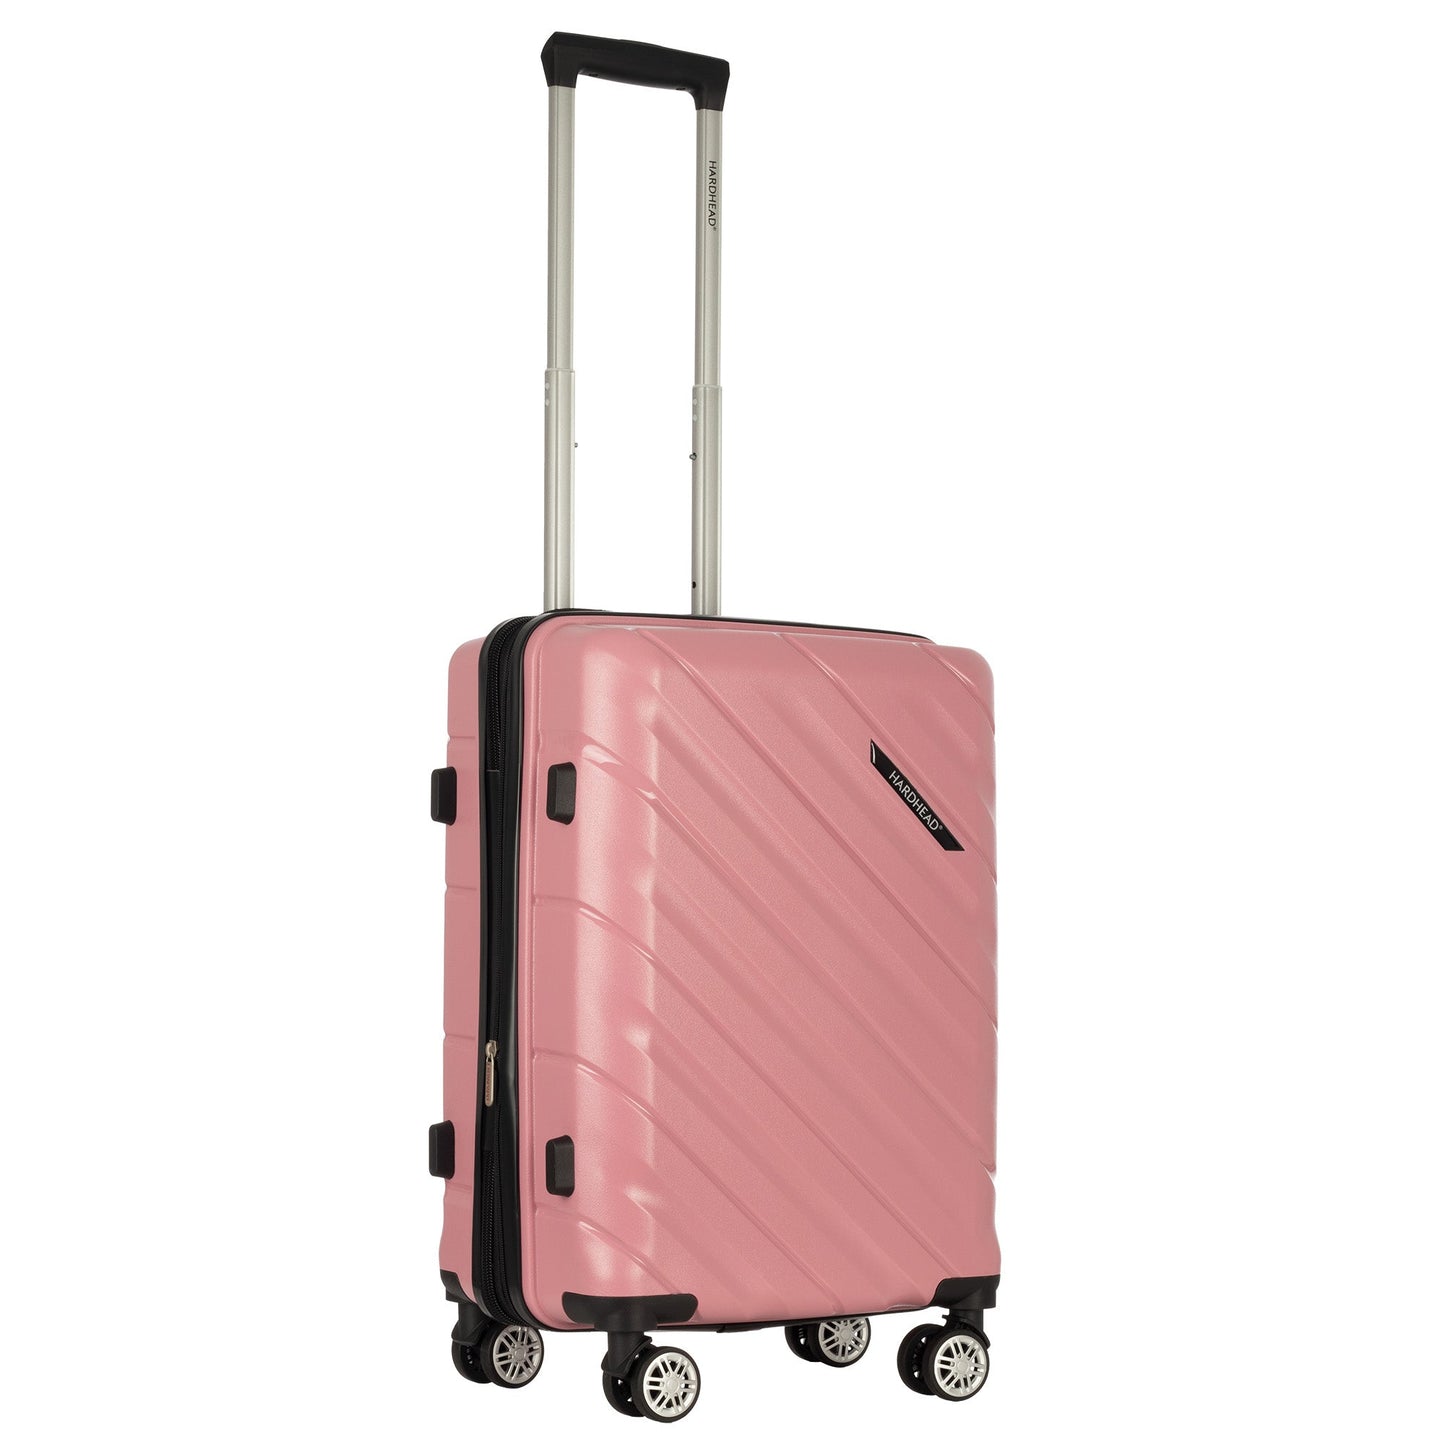 Ian collection pink luggage (21") Suitcase Lock Spinner